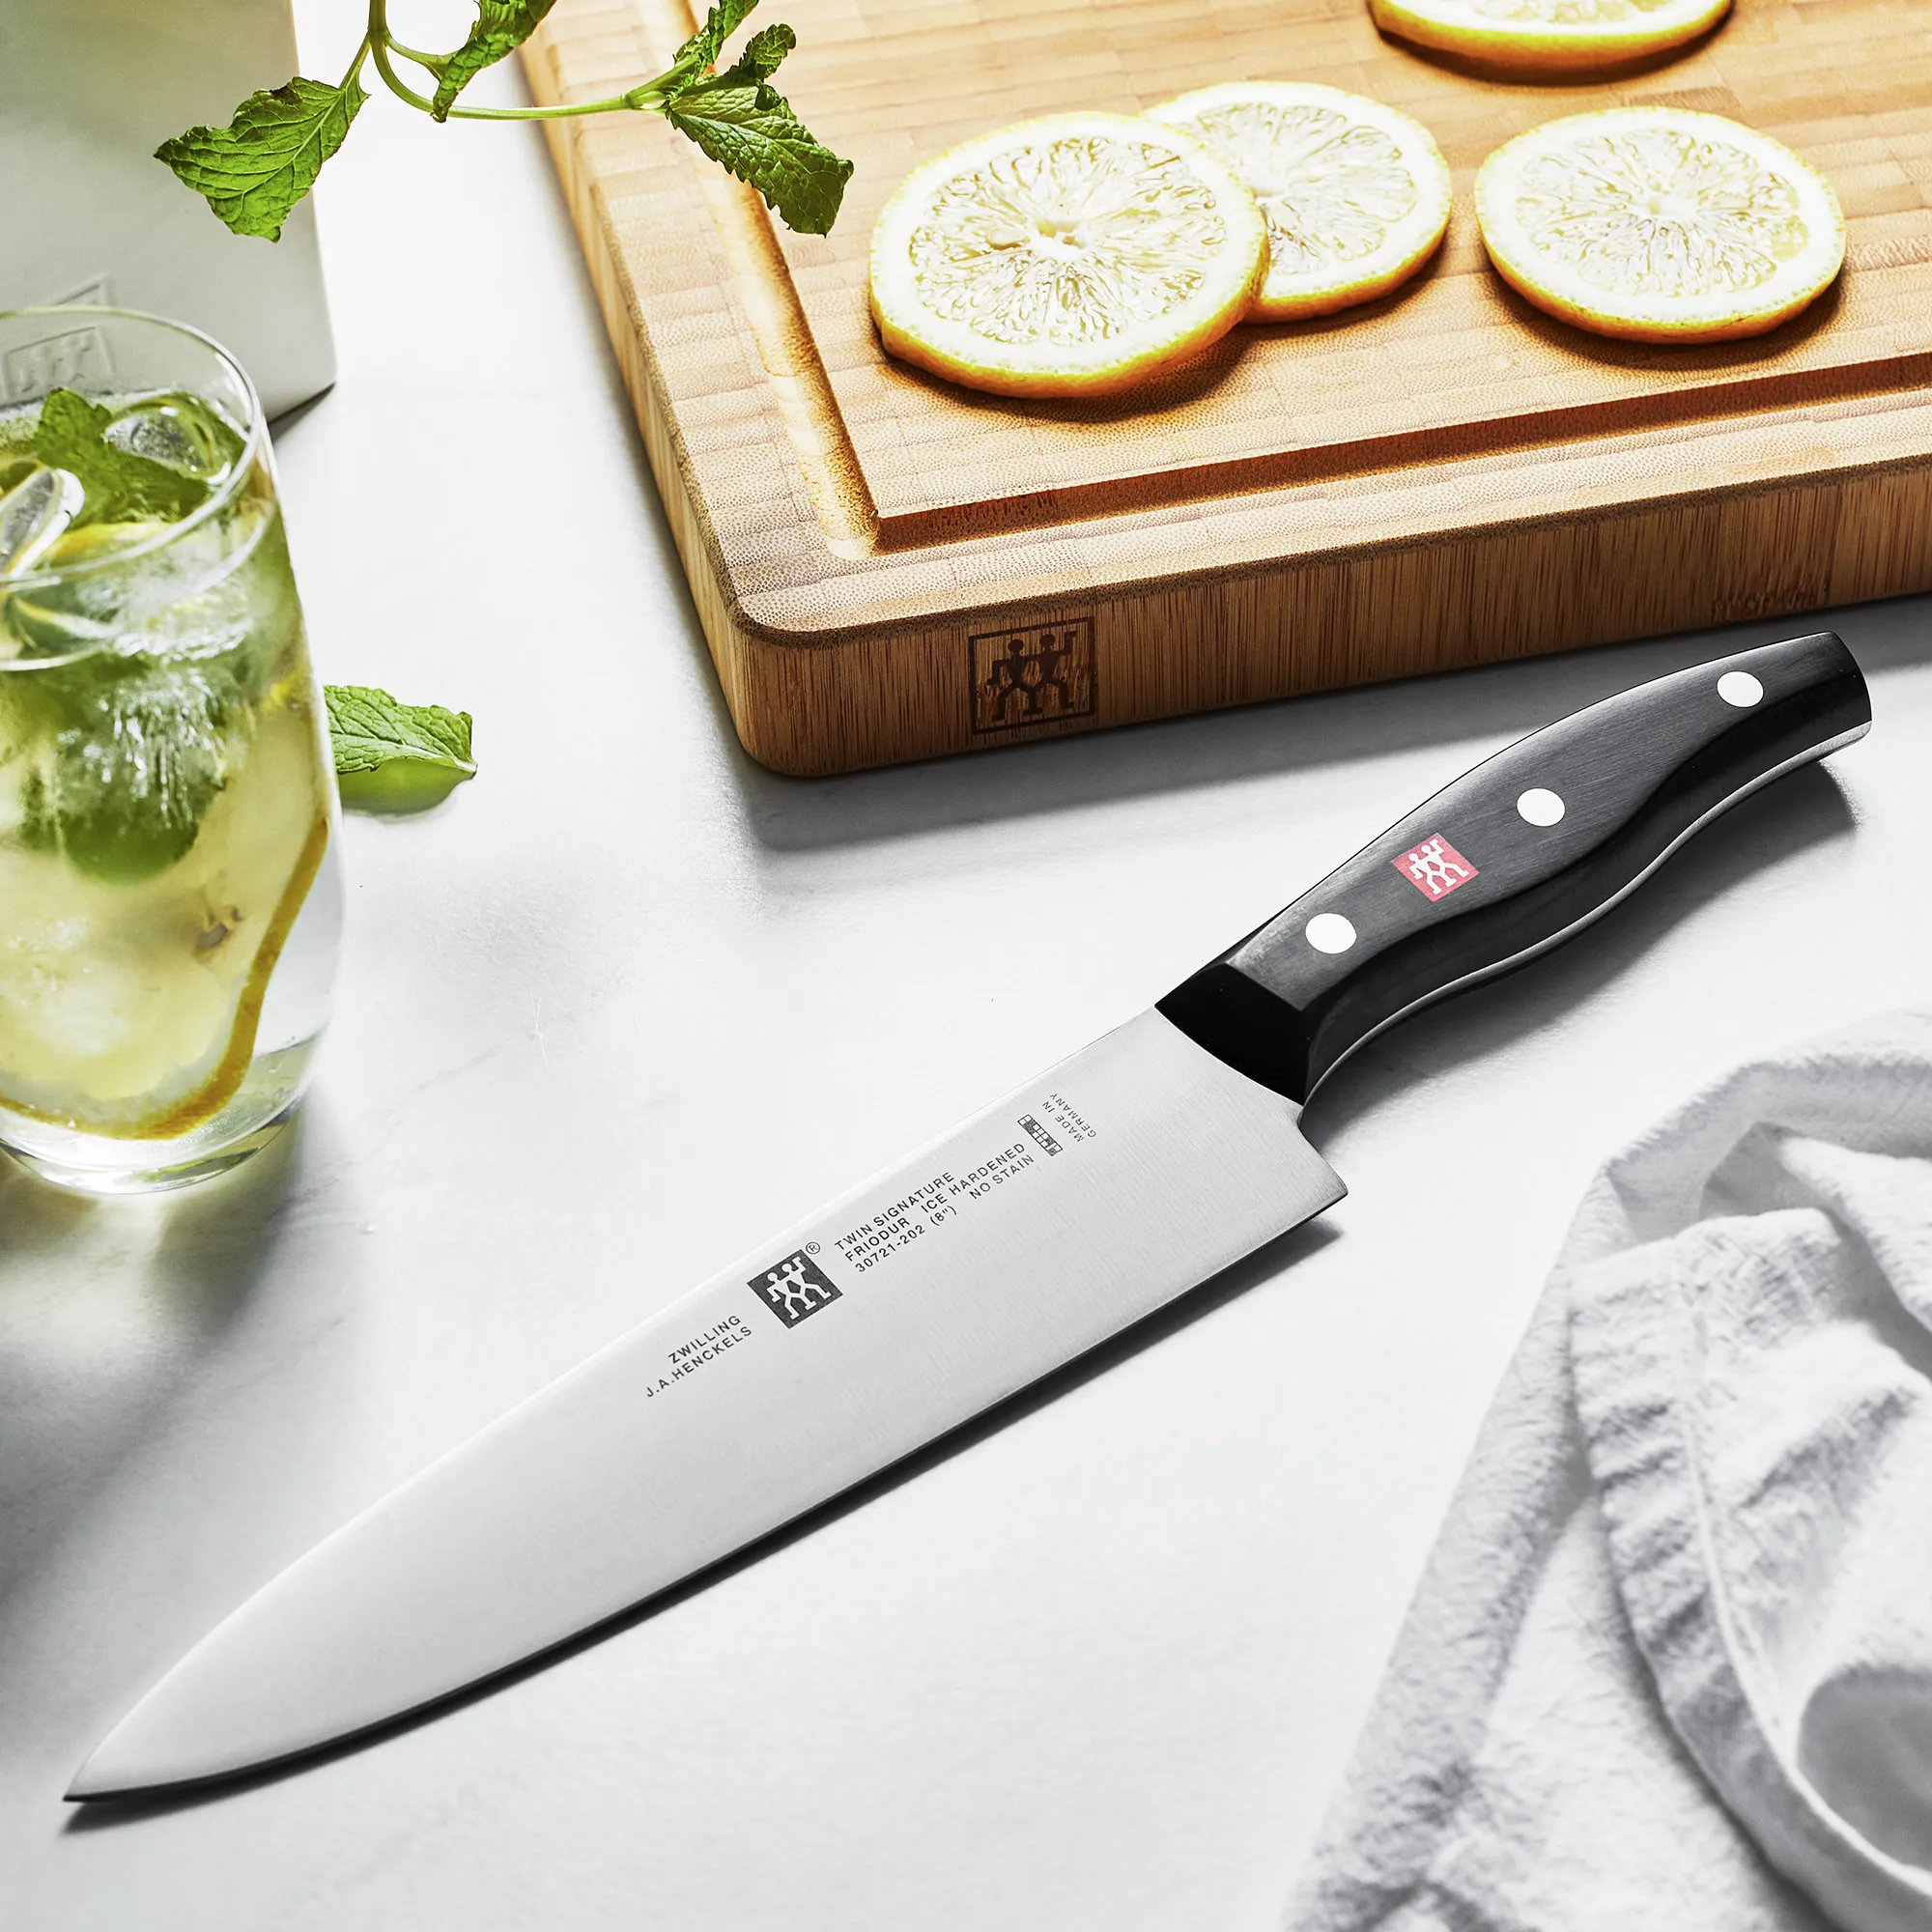 ZWILLING TWIN Signature Chinese Chef Knife, Chinese Cleaver Knife, 7-Inch,  Stainless Steel, Black 